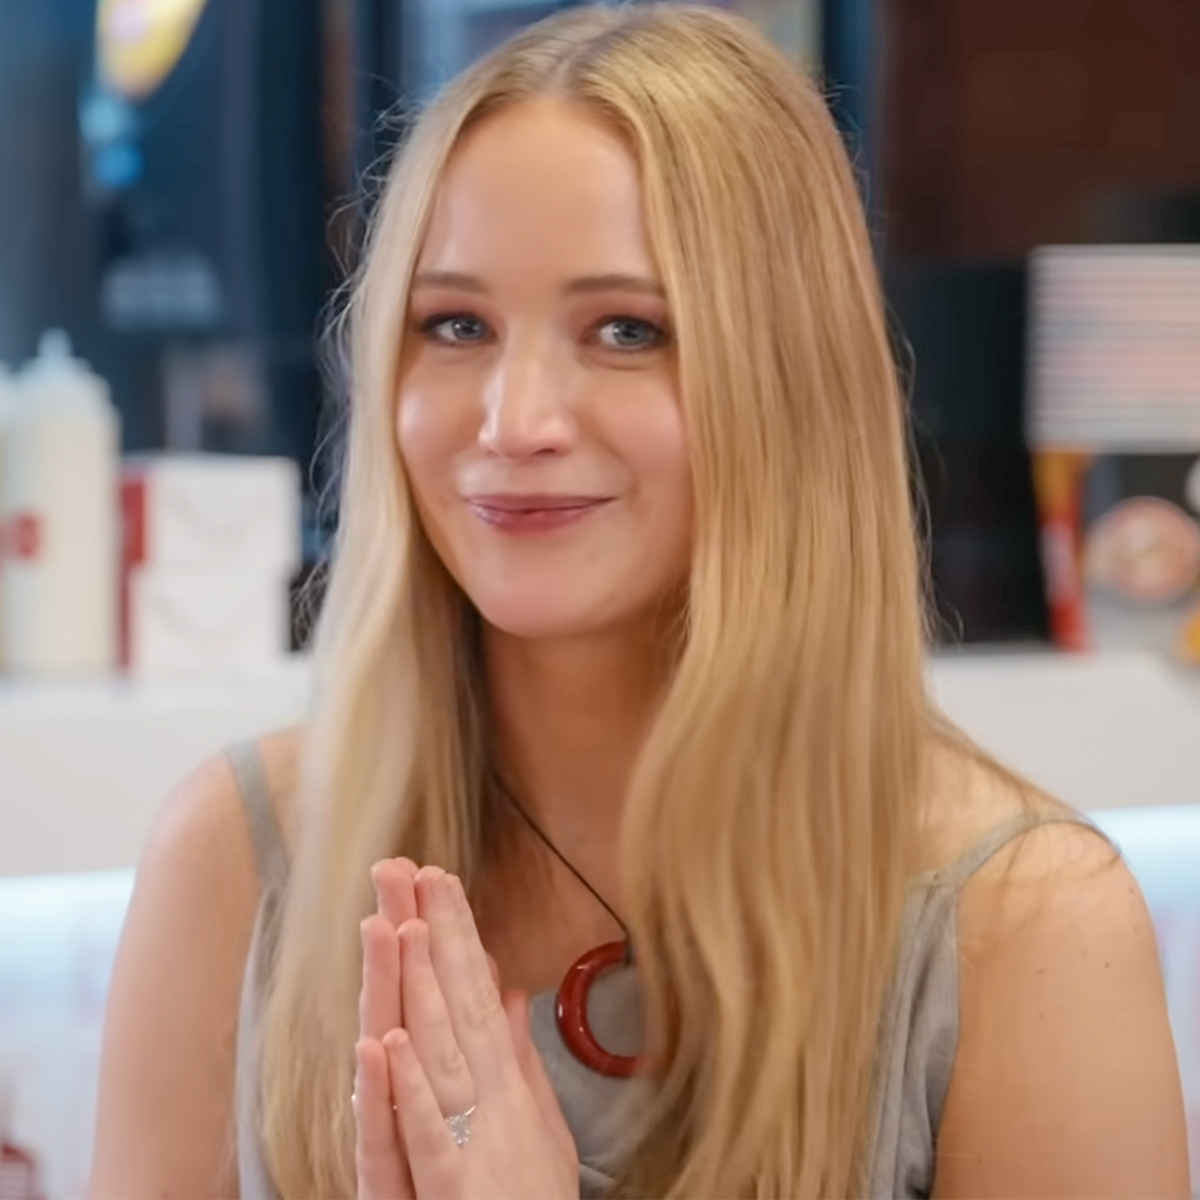 Pull Up a Seat for Jennifer Lawrence’s Chicken Shop Date